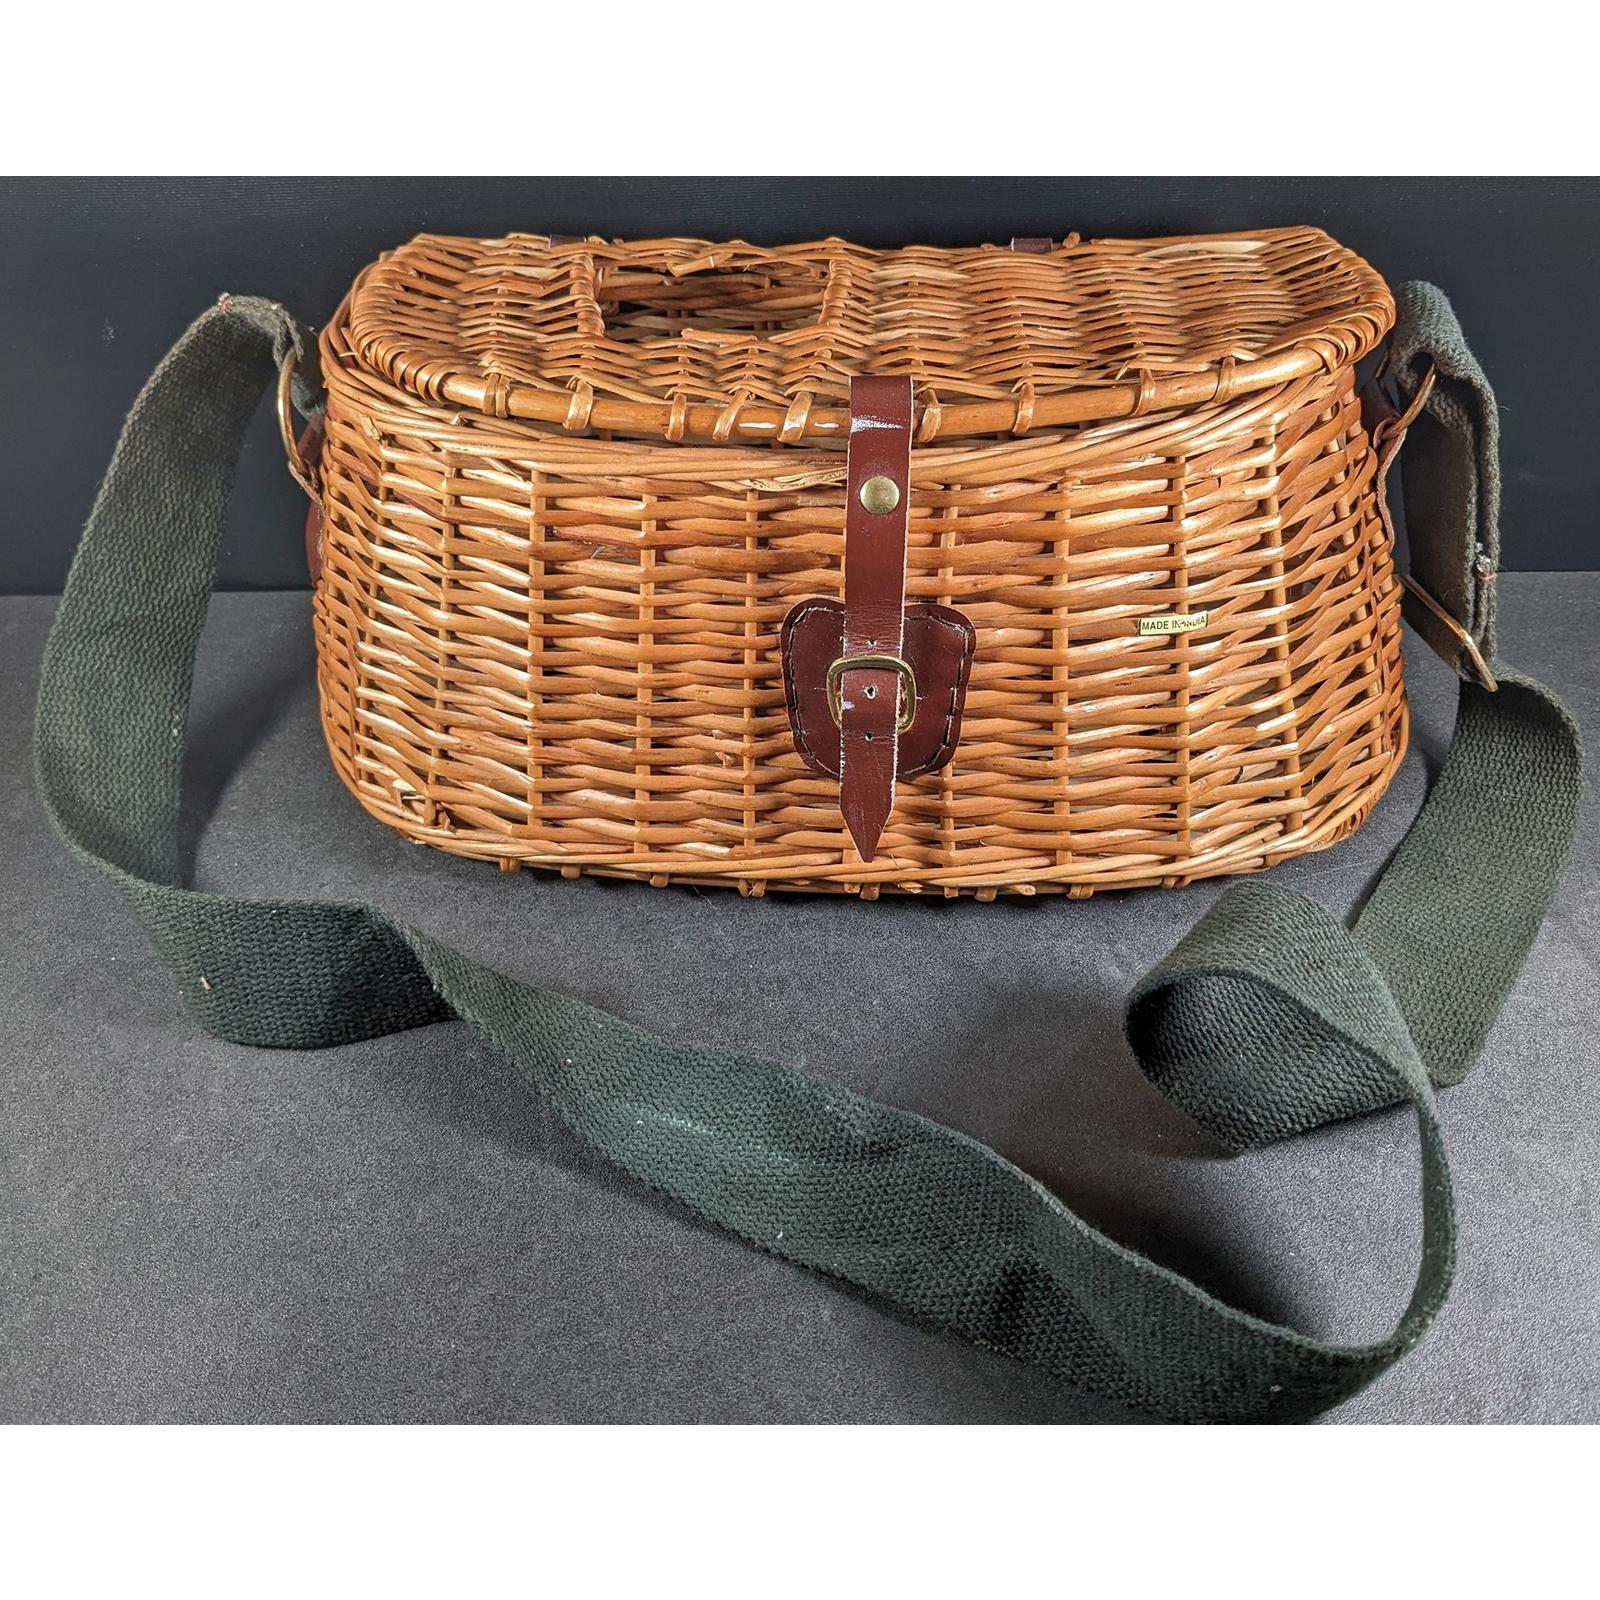 Vintage Wicker Fishing Creel Basket with Antique Primitive Leather Straps